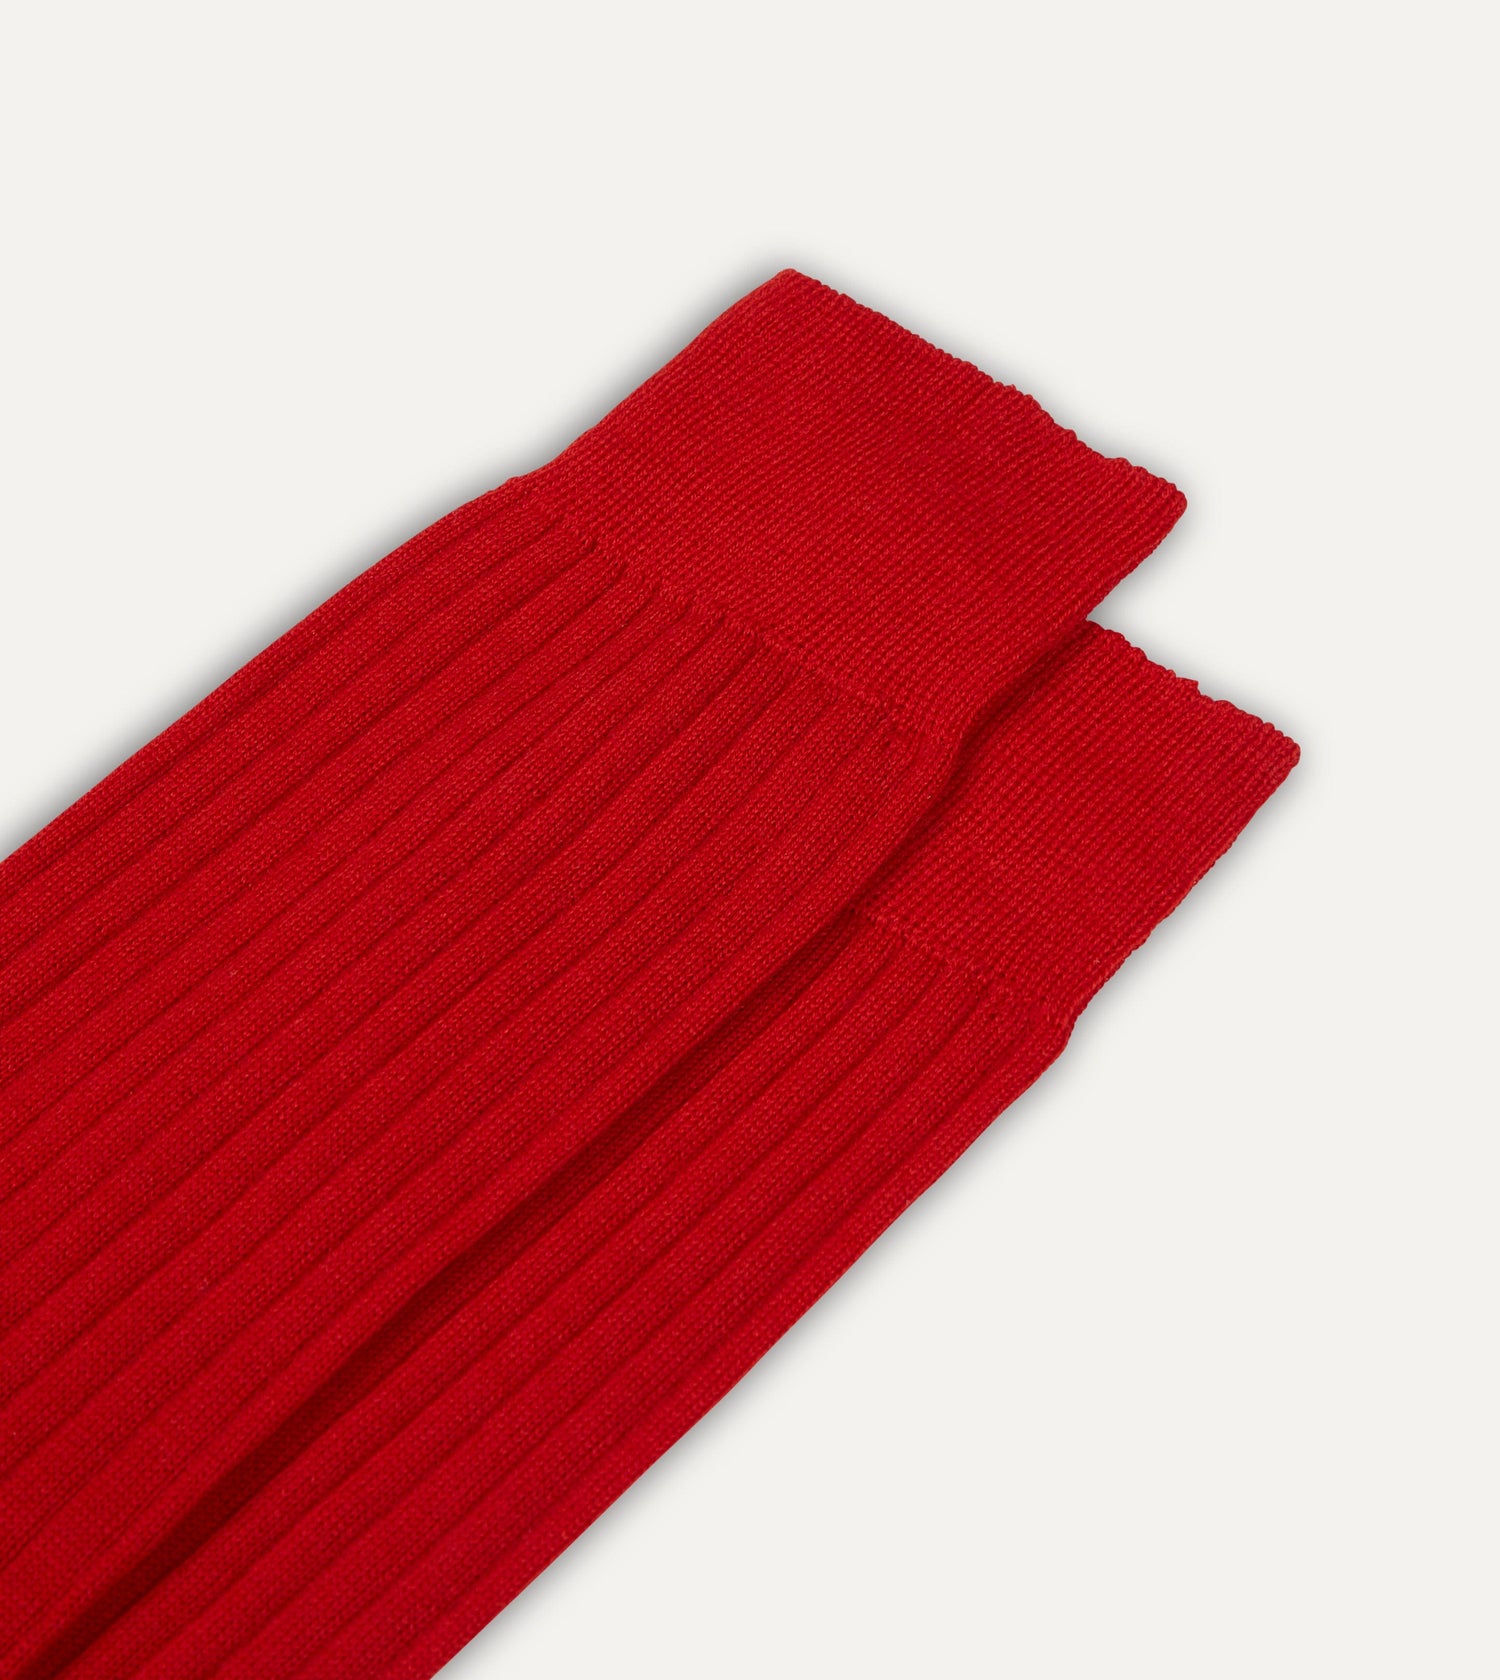 Red Wool Over-the-Calf Socks